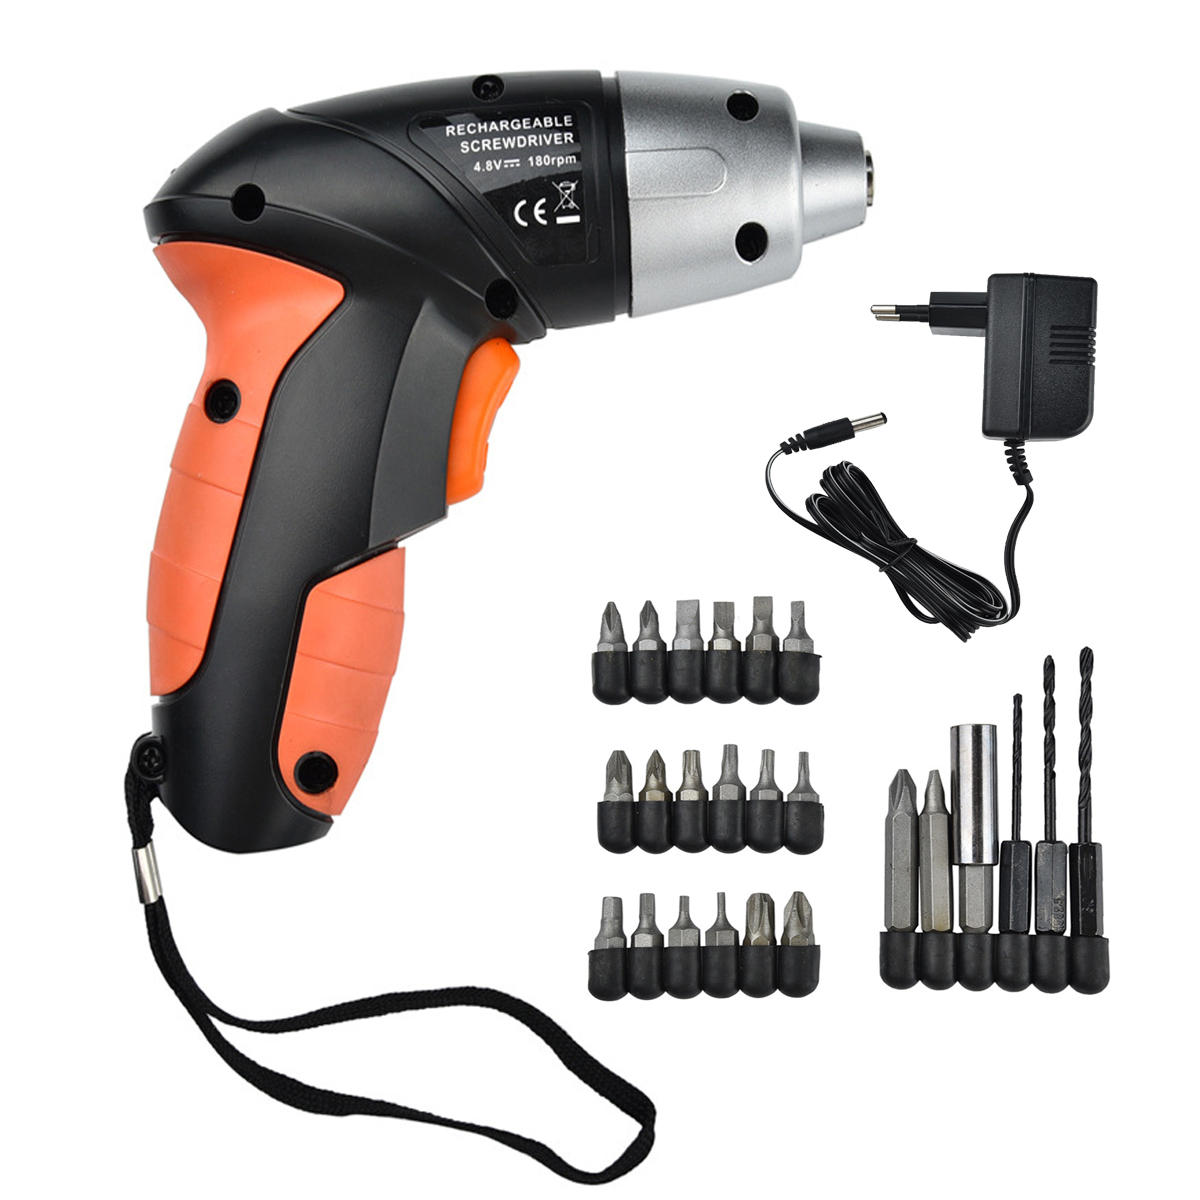 24PC 4.8V Electric Rechargeable Cordless Screwdriver Drill Bits Kit EU